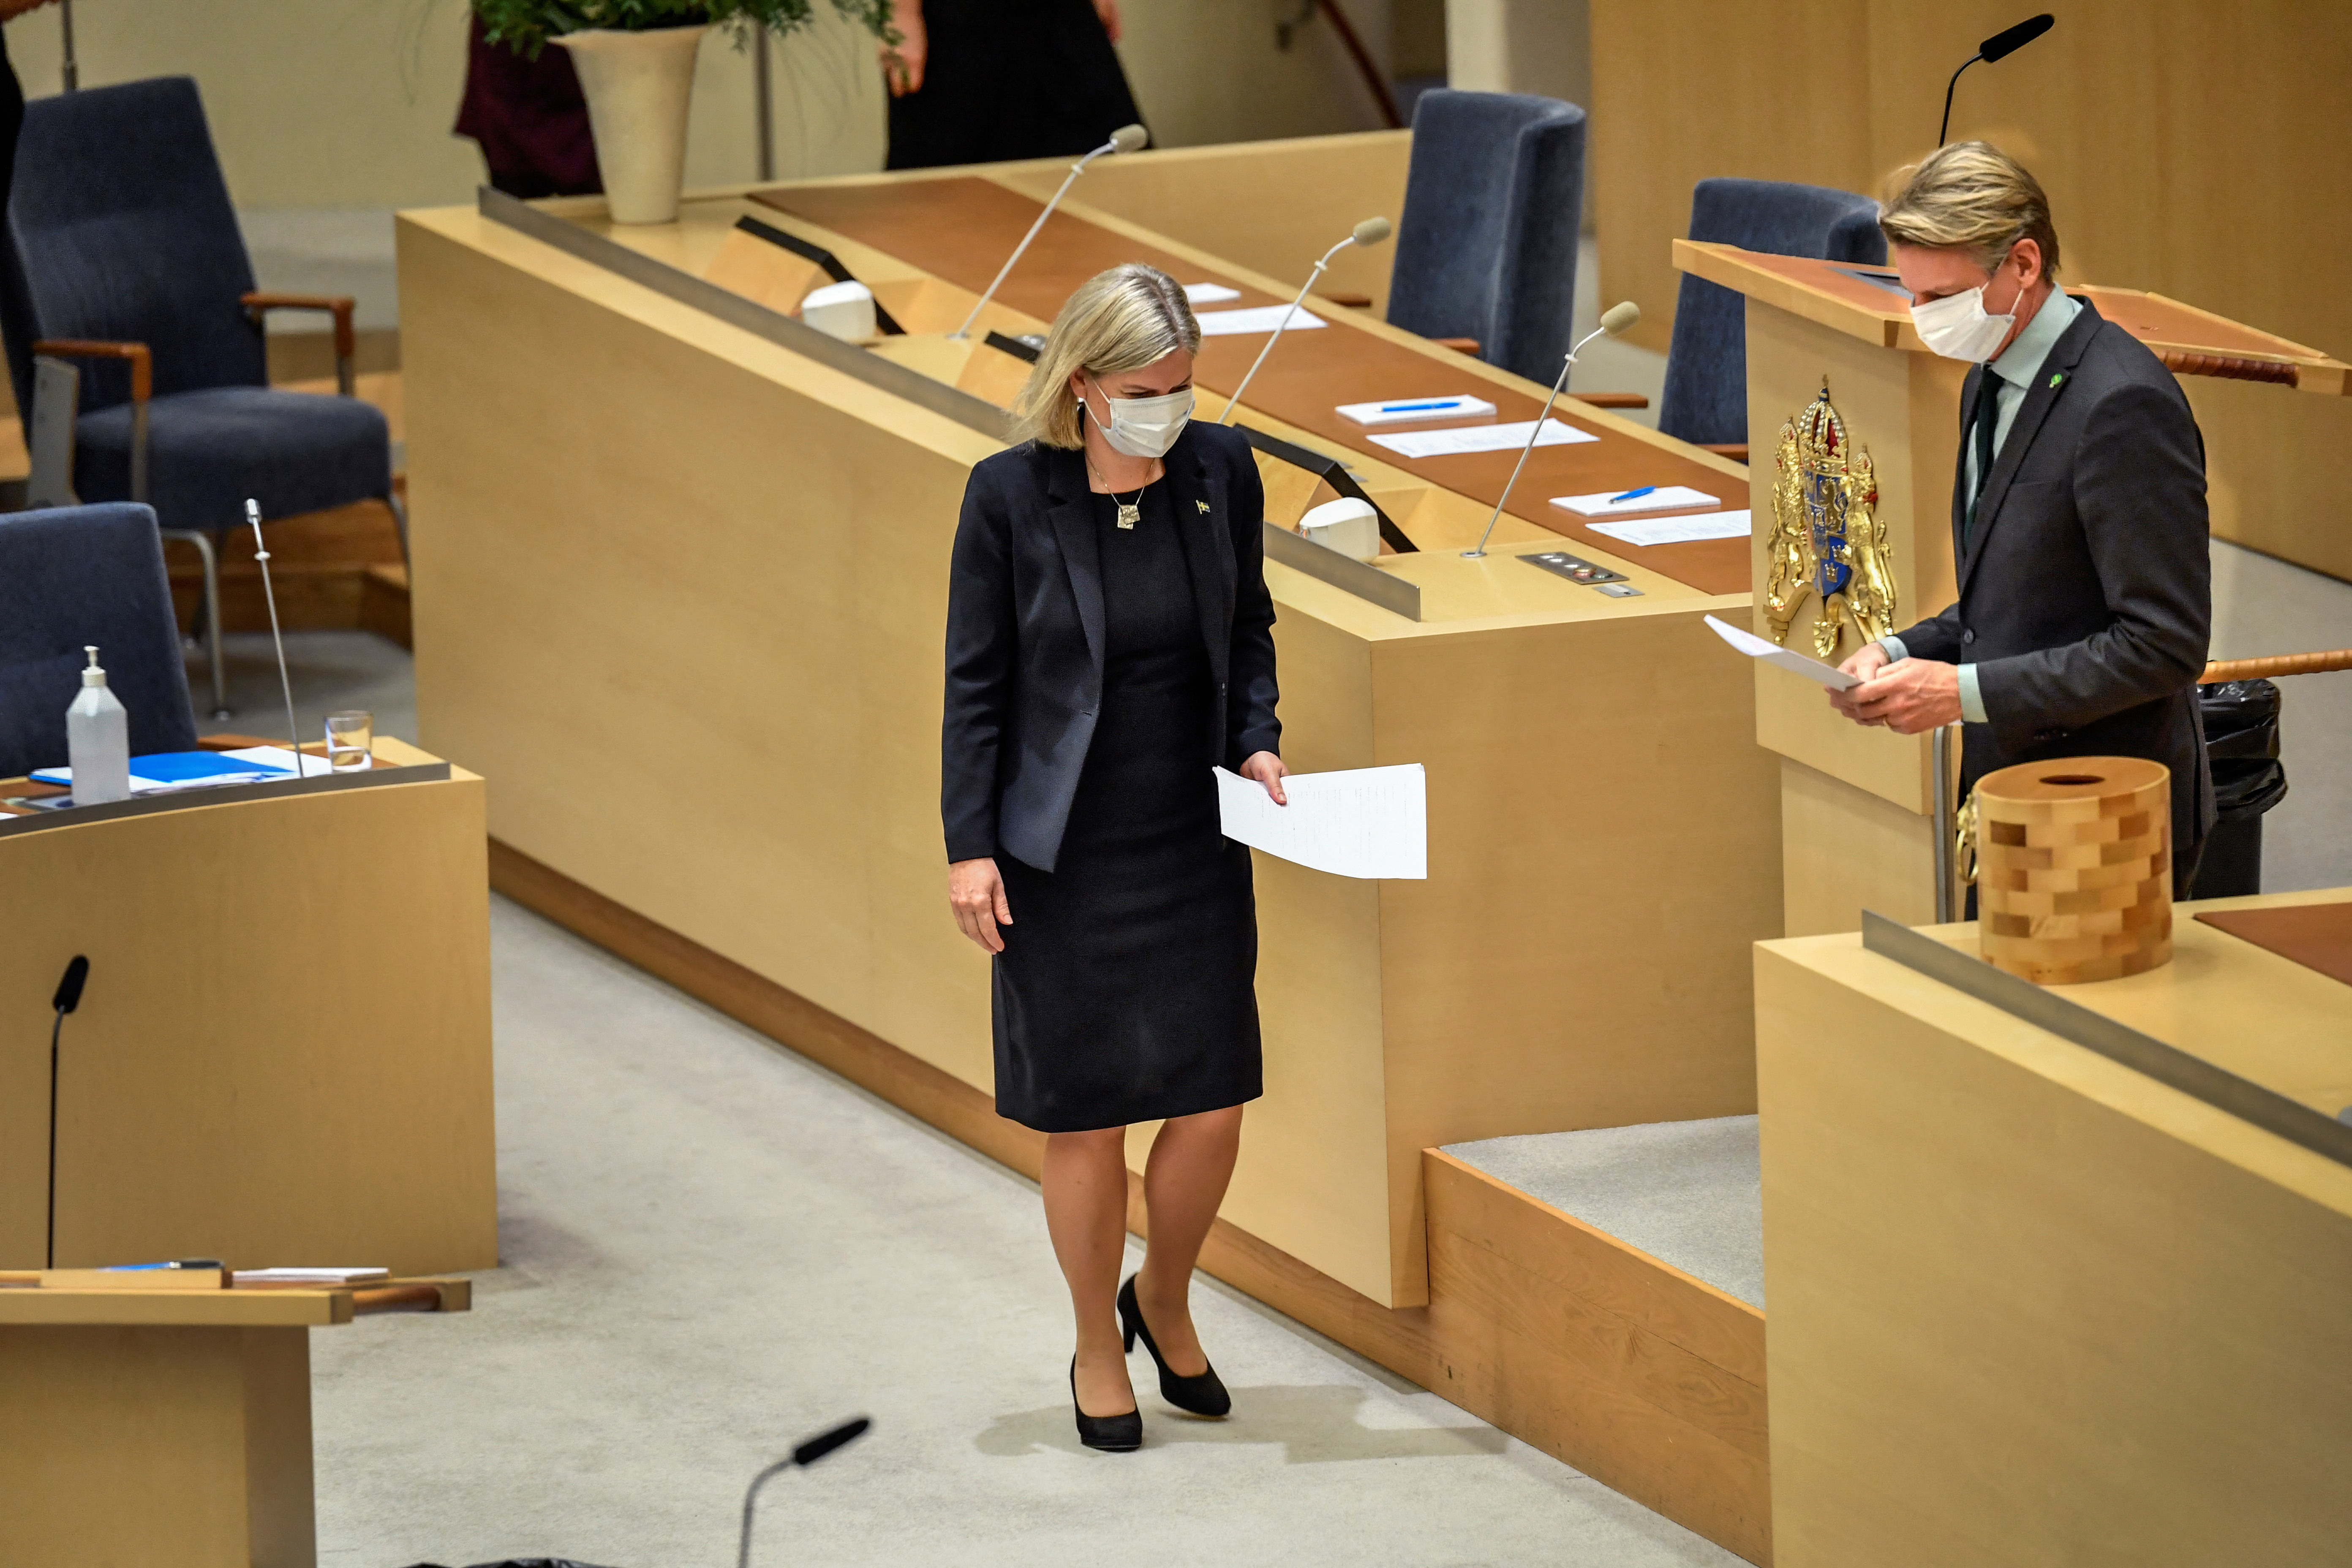 Swedish Prime Minister Magdalena Andersson and Green Party Leader Per Bolund are pictured during a parliamentary debate in Swedish parliament Riksdagen